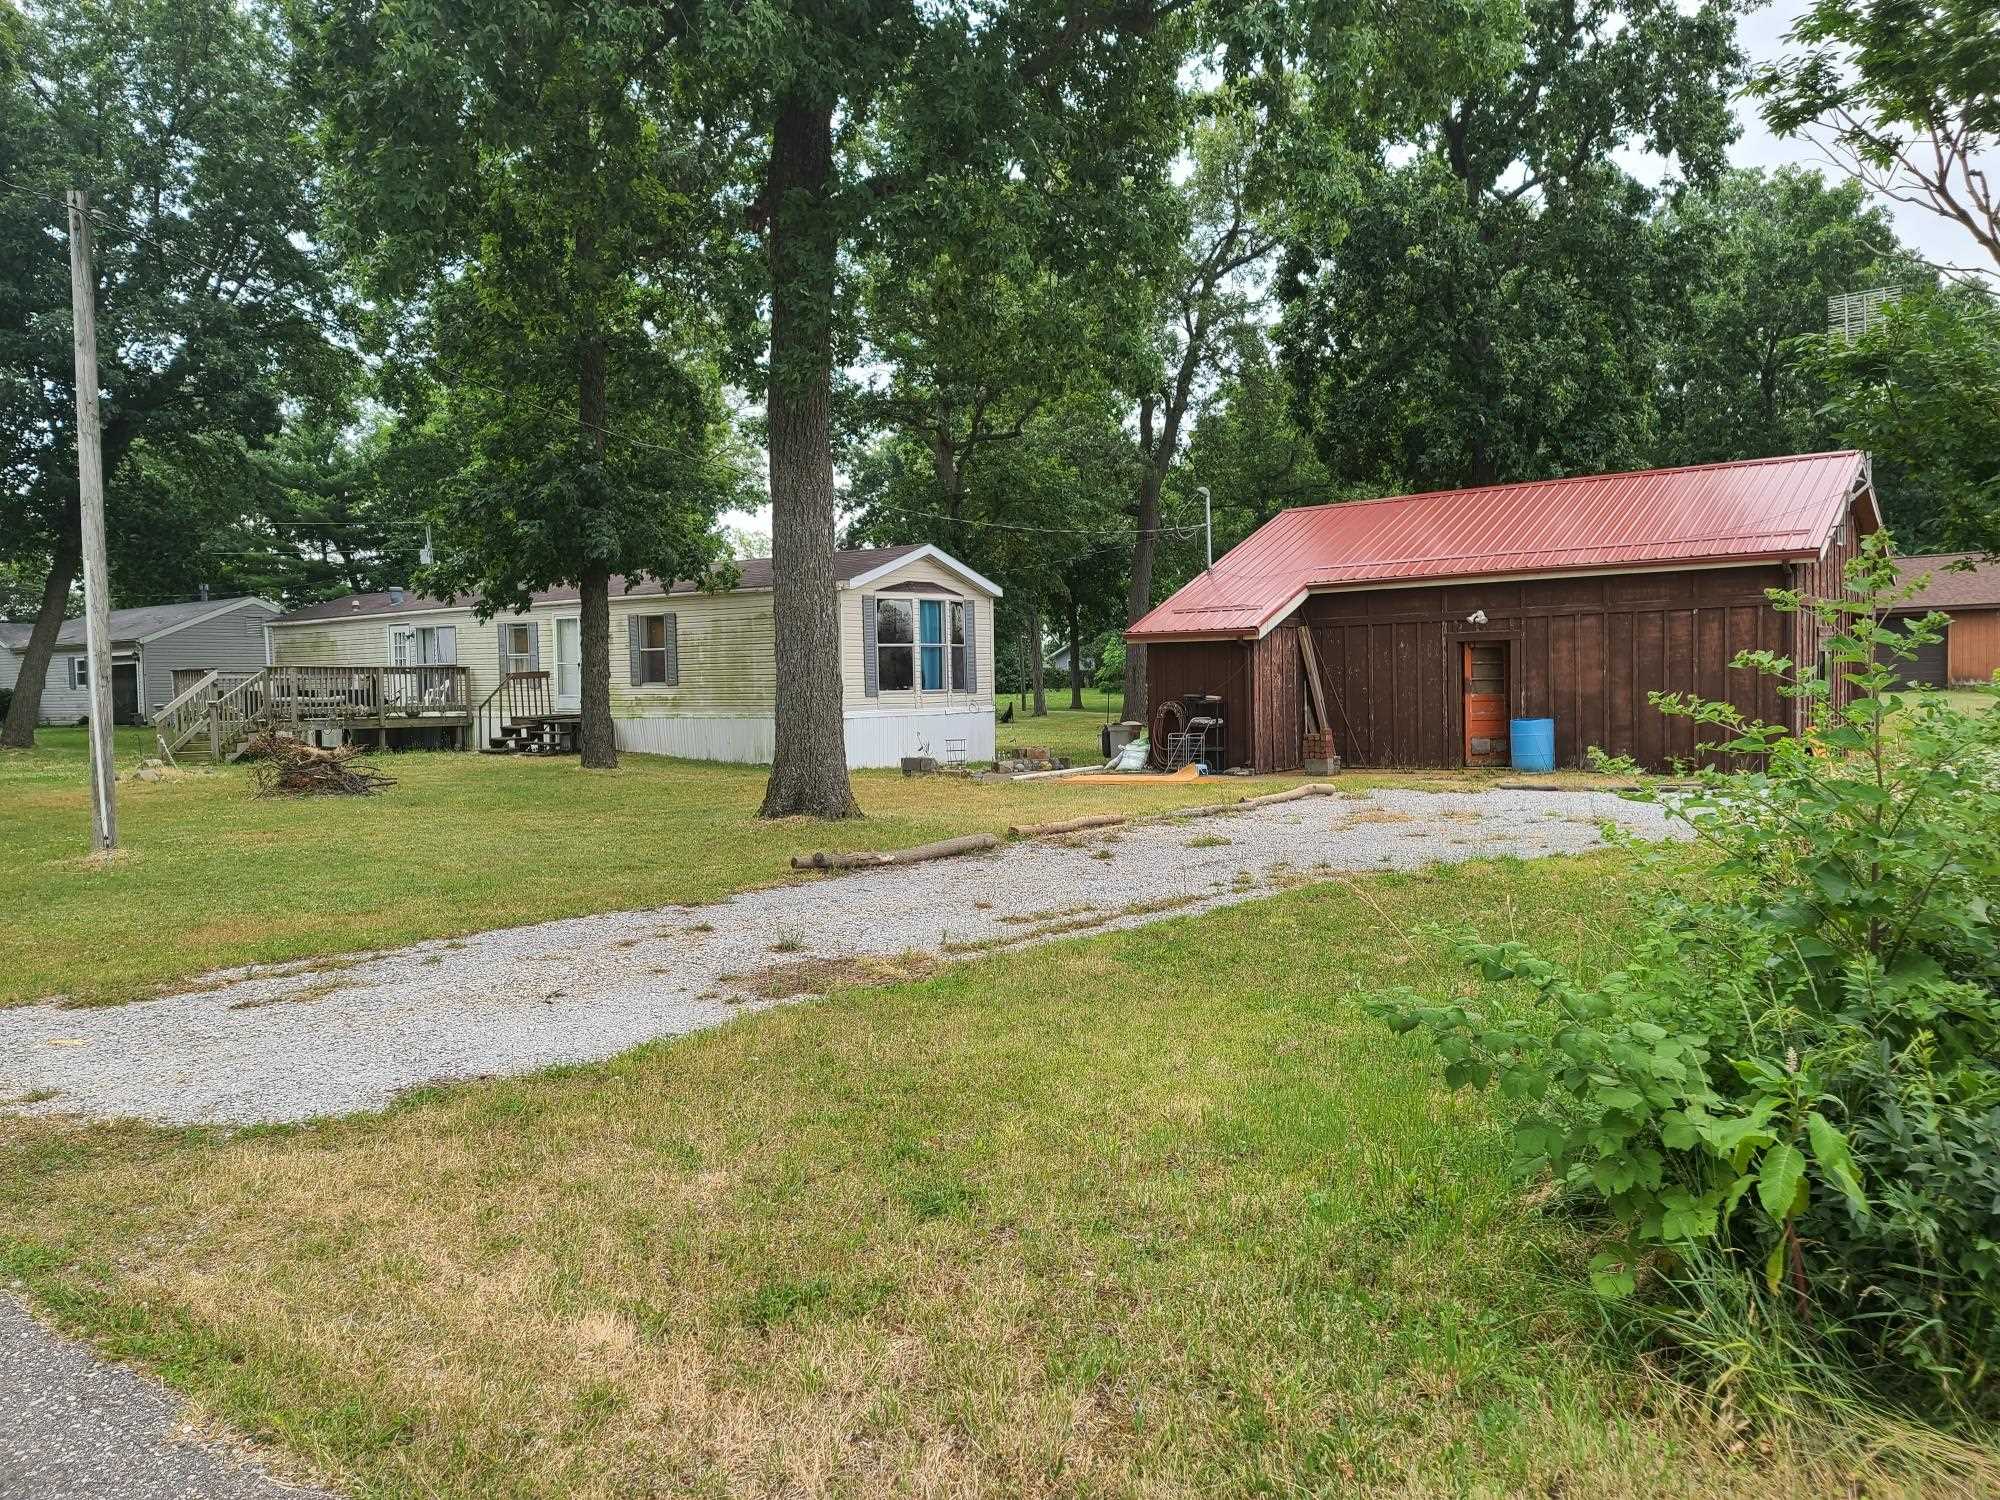 40 LN 250 West Otter Lake, Angola, IN 46703